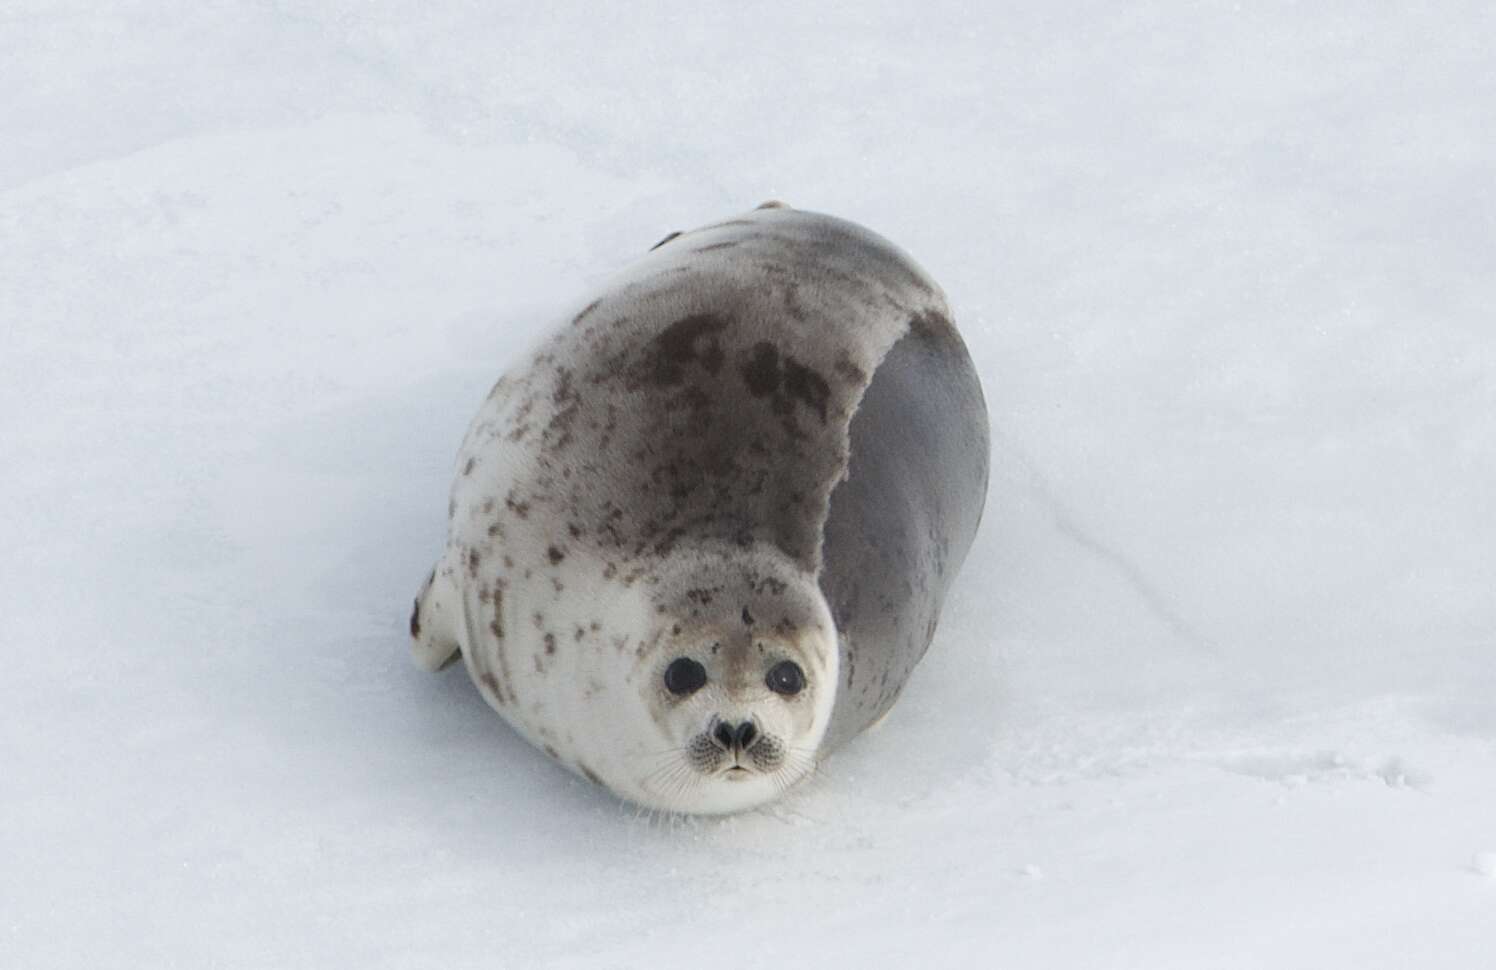 Harp seal on an ice floe in Canada